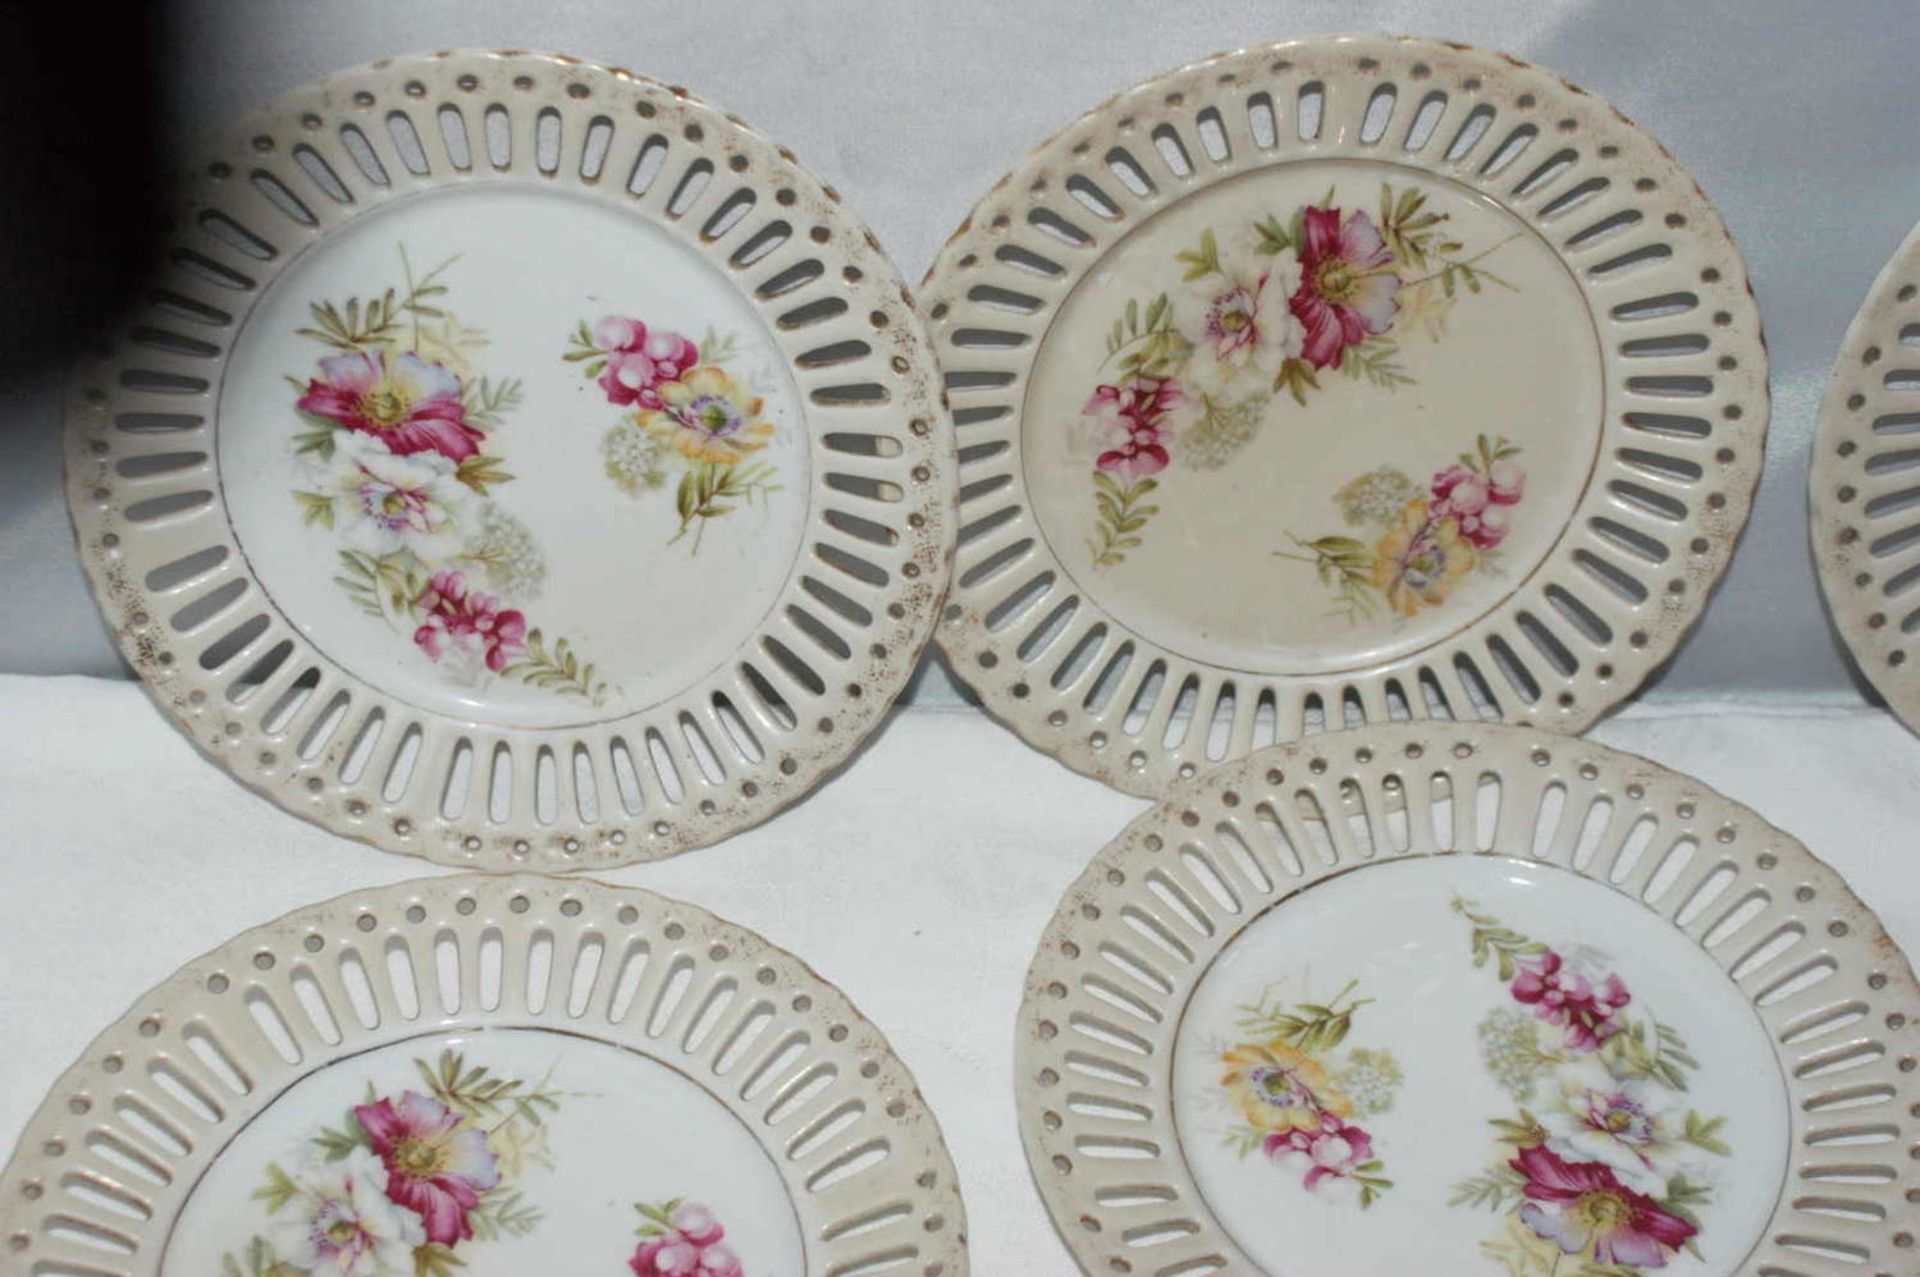 Porcelain, 12 breakthrough plates around 1920 with floral repurposed decoration. - Image 2 of 2